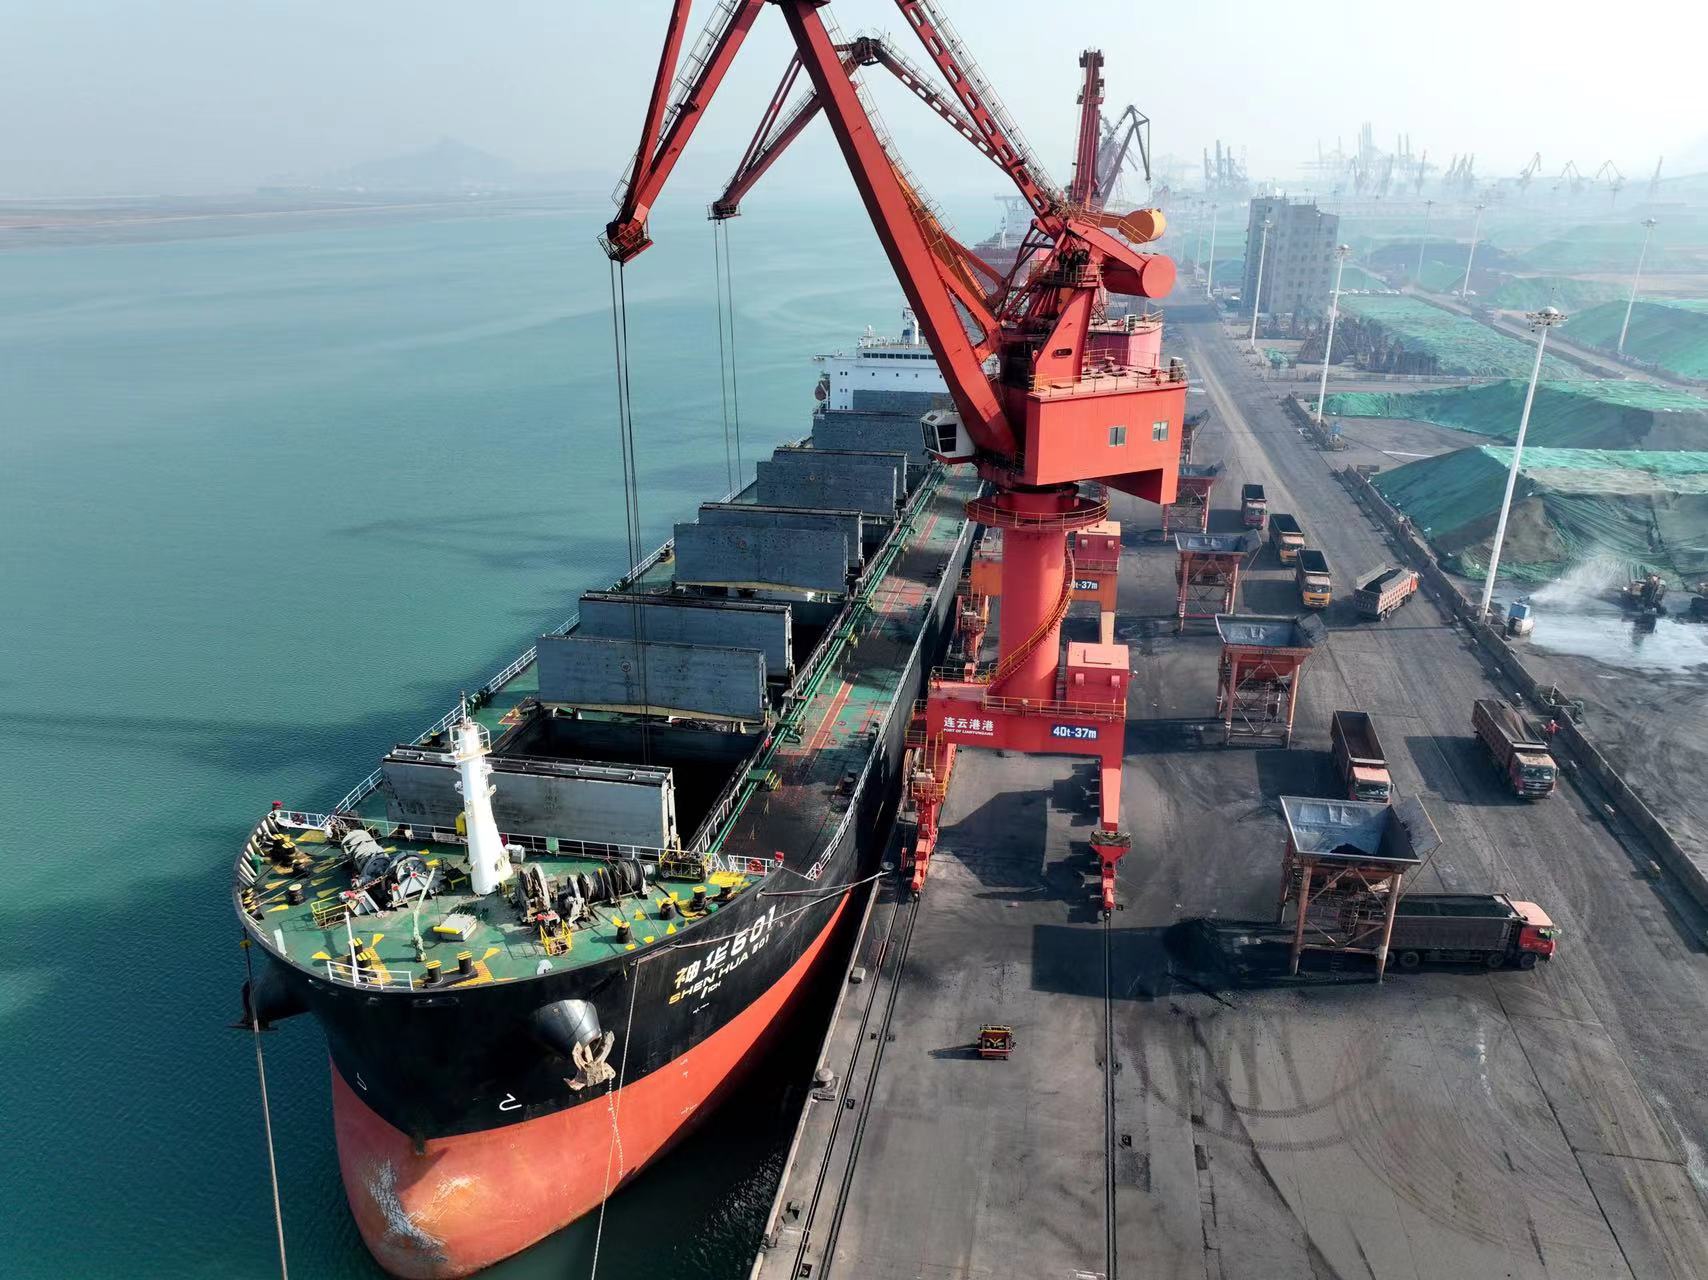 Tons of thermal coal are unloaded and transported at a port in Lianyungang, East China's Jiangsu Province on December 21, 2022. Photo: VCG